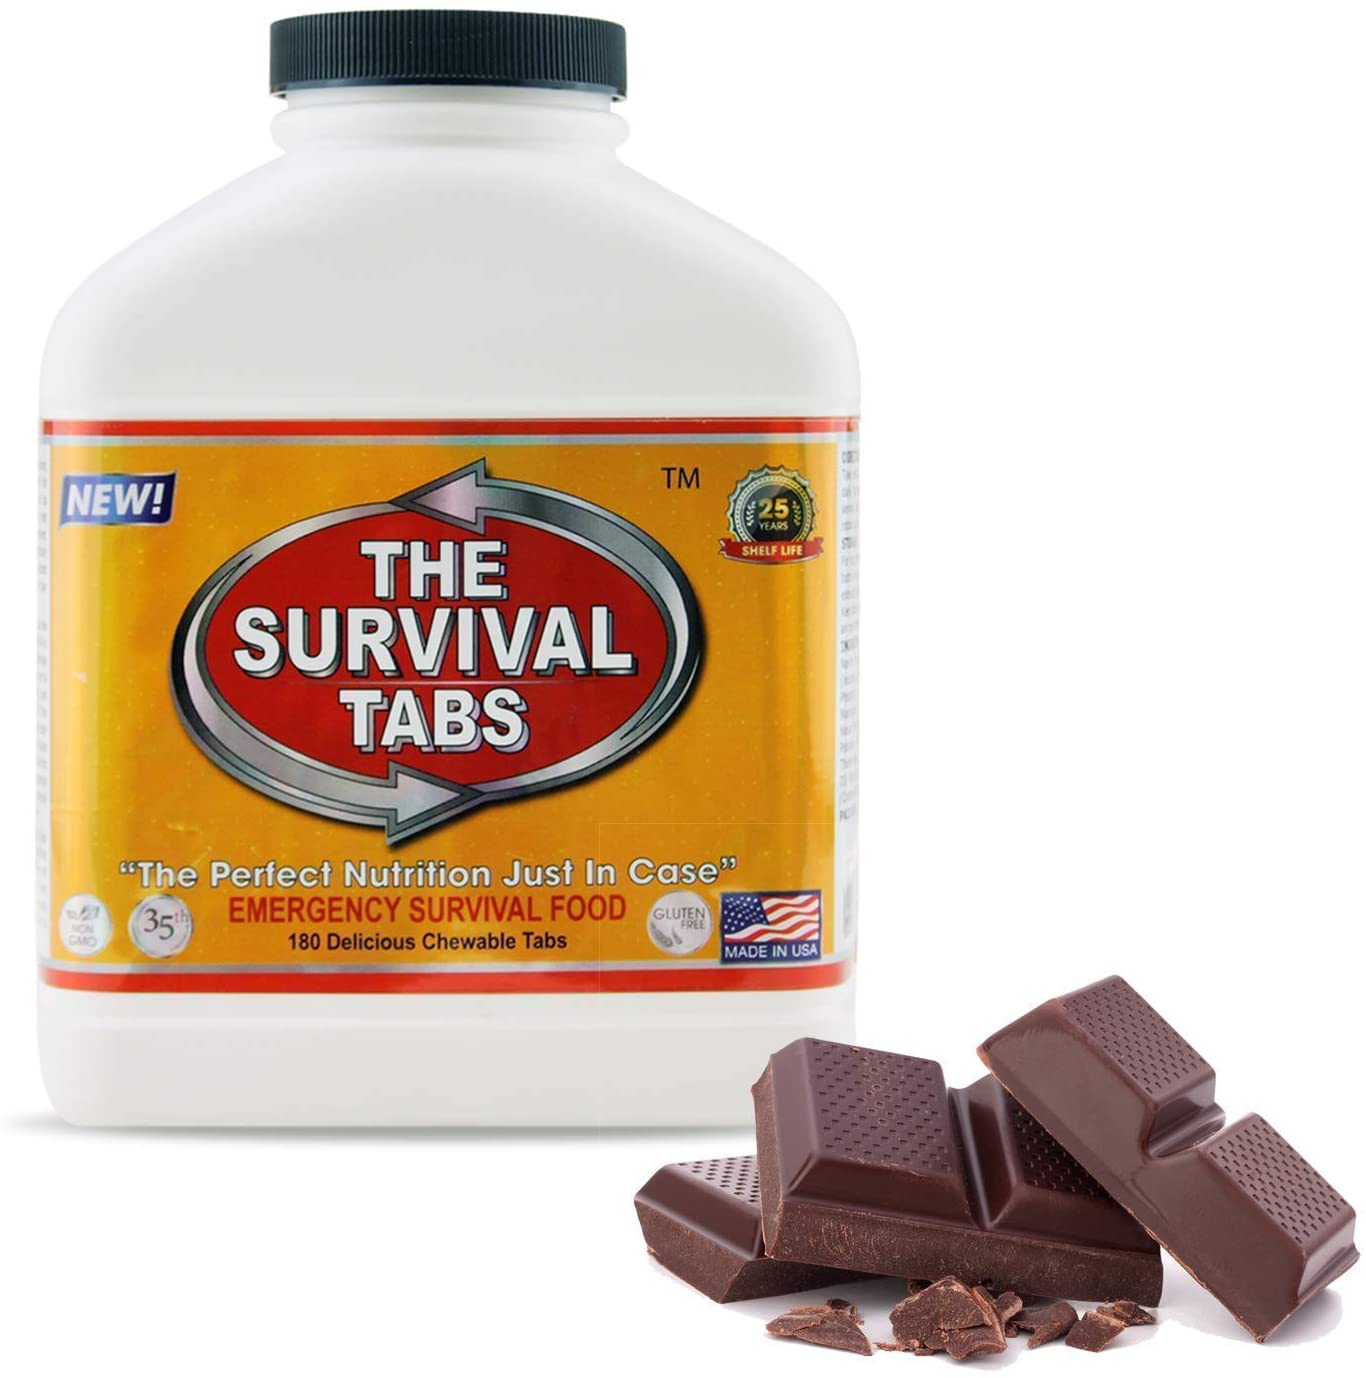 Survival Tabs - 15 Day Survival Food Supply - Gluten Free and Non-GMO 25 Years Shelf Life (180 Tabs - Chocolate), Men's